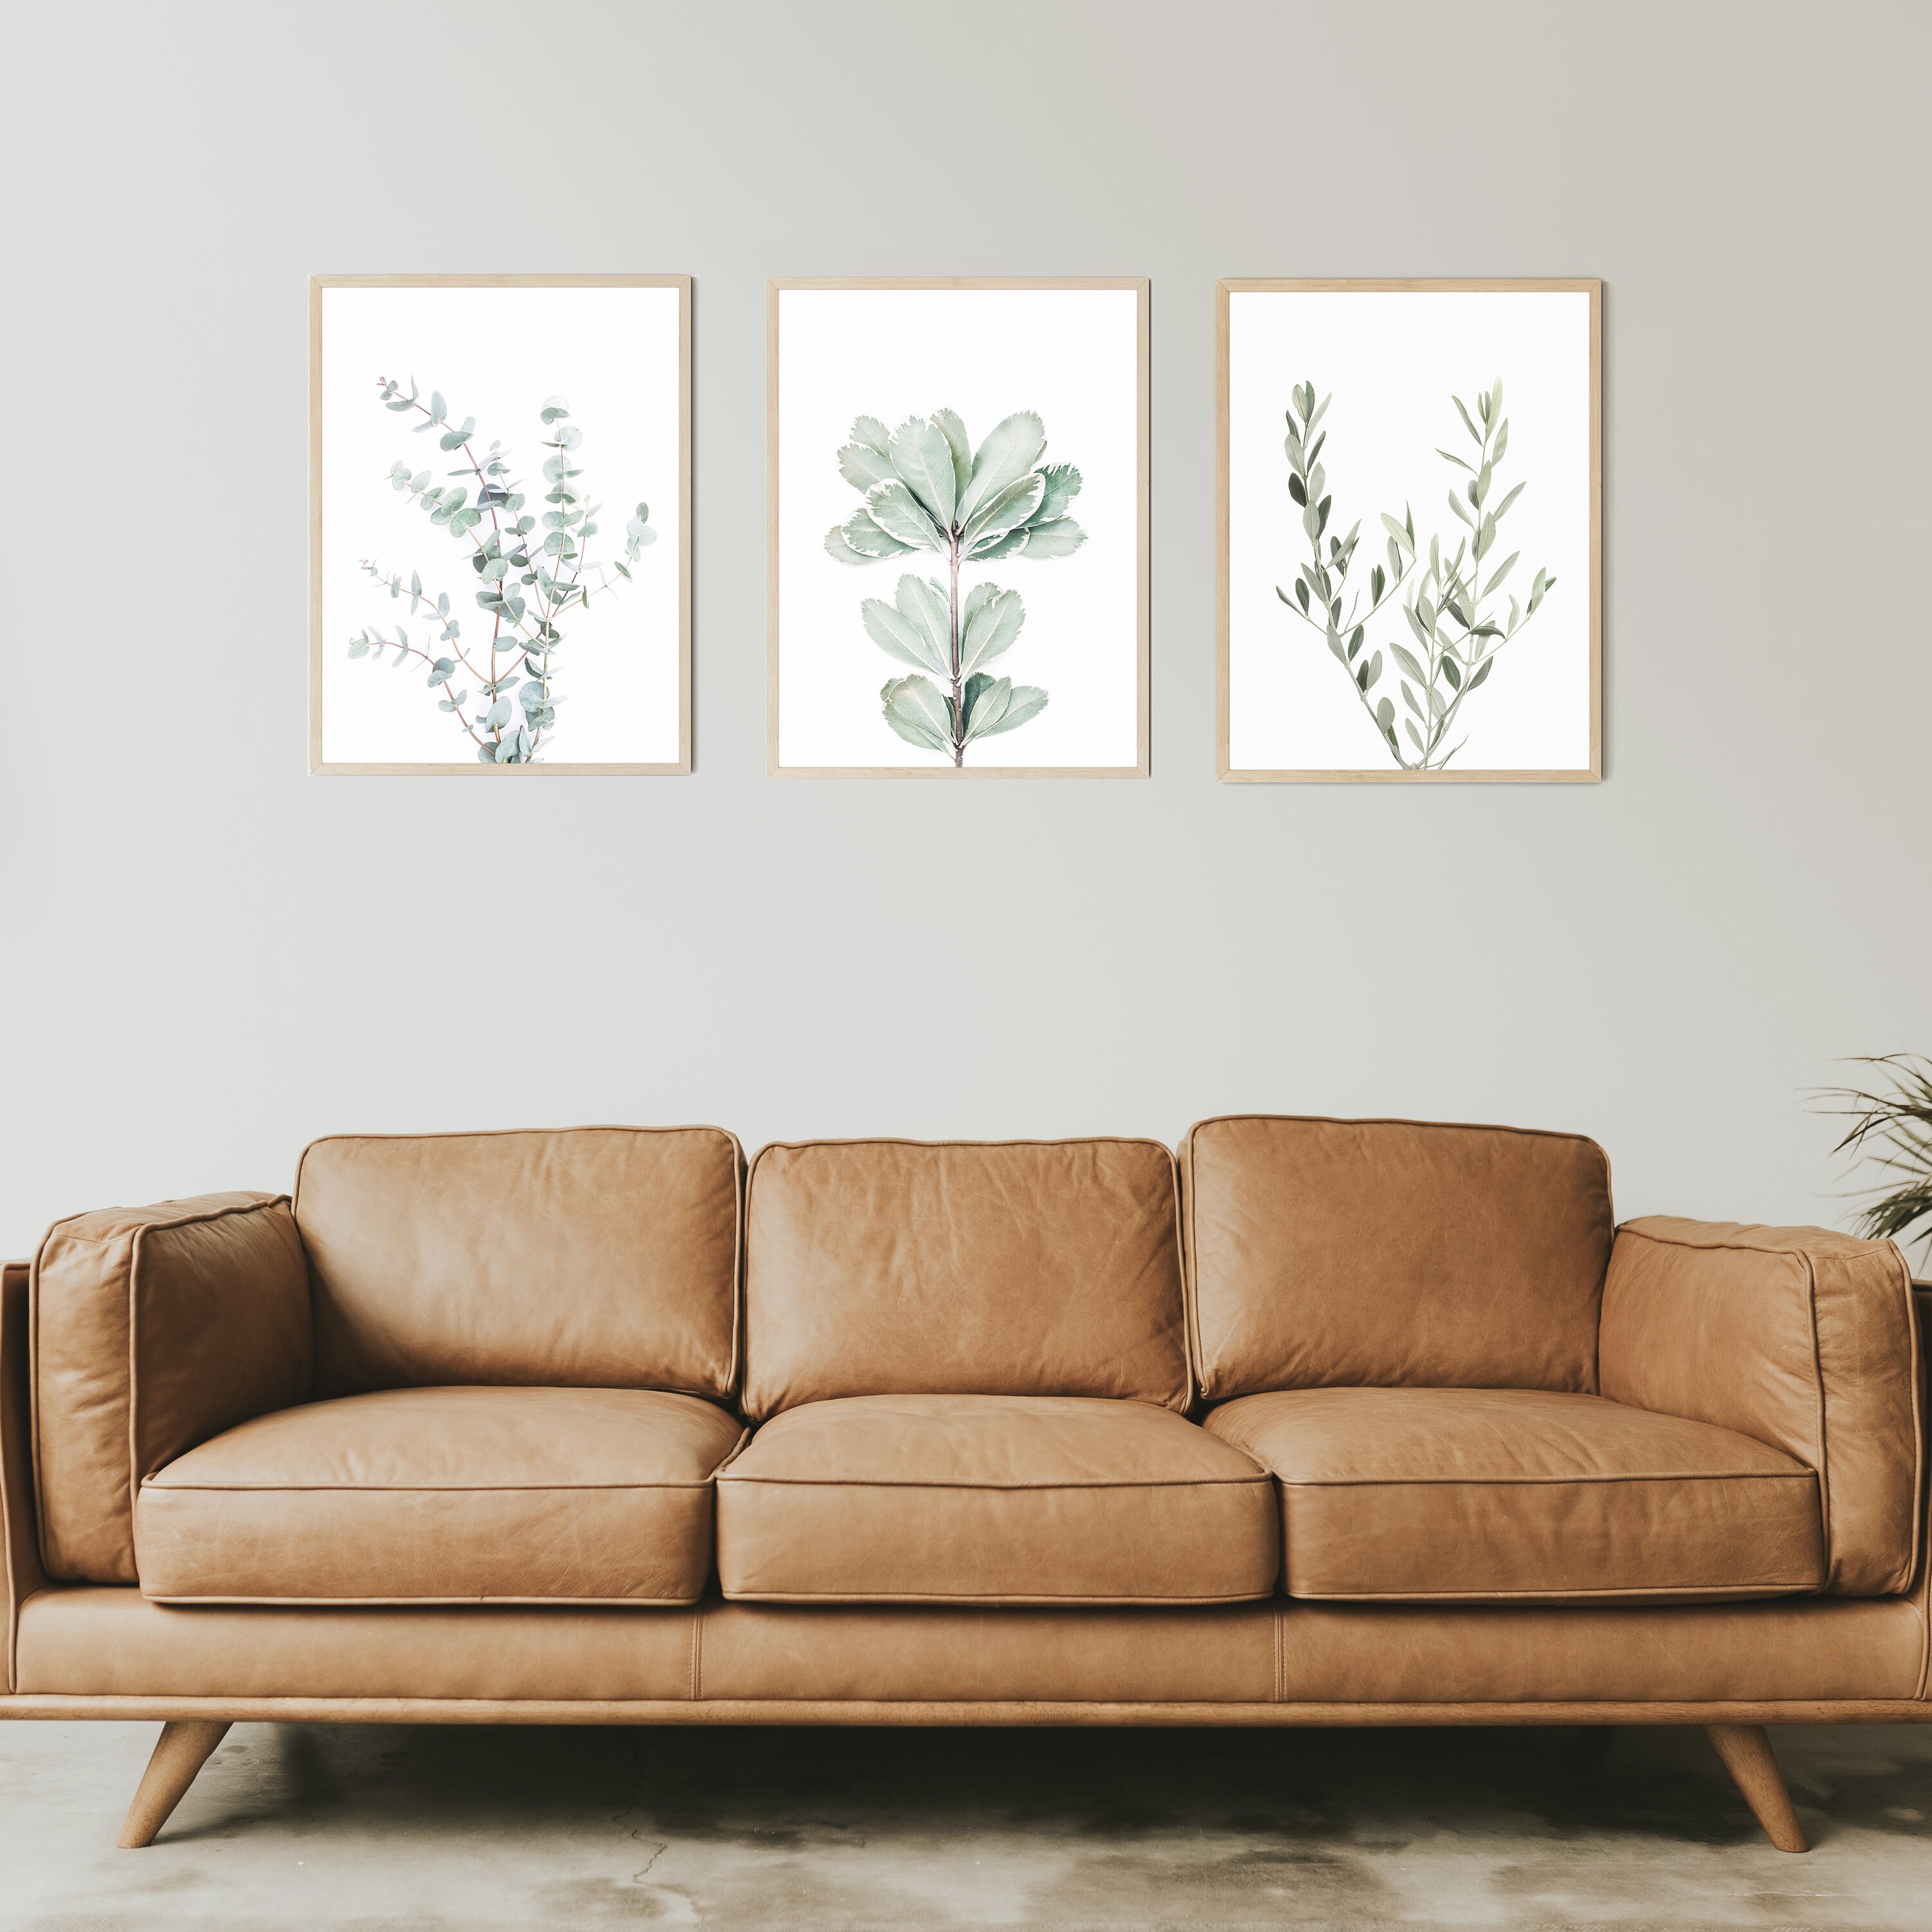 Geeignet Botanical Wall Art Modern Boho Rustic Houseplant Canvas Decor Wooden Framed Paintings Set,Gray And White Green Leaf Plant Pictures for Living Room Bathroom Outdoor 12x16 Inch 3 Panel